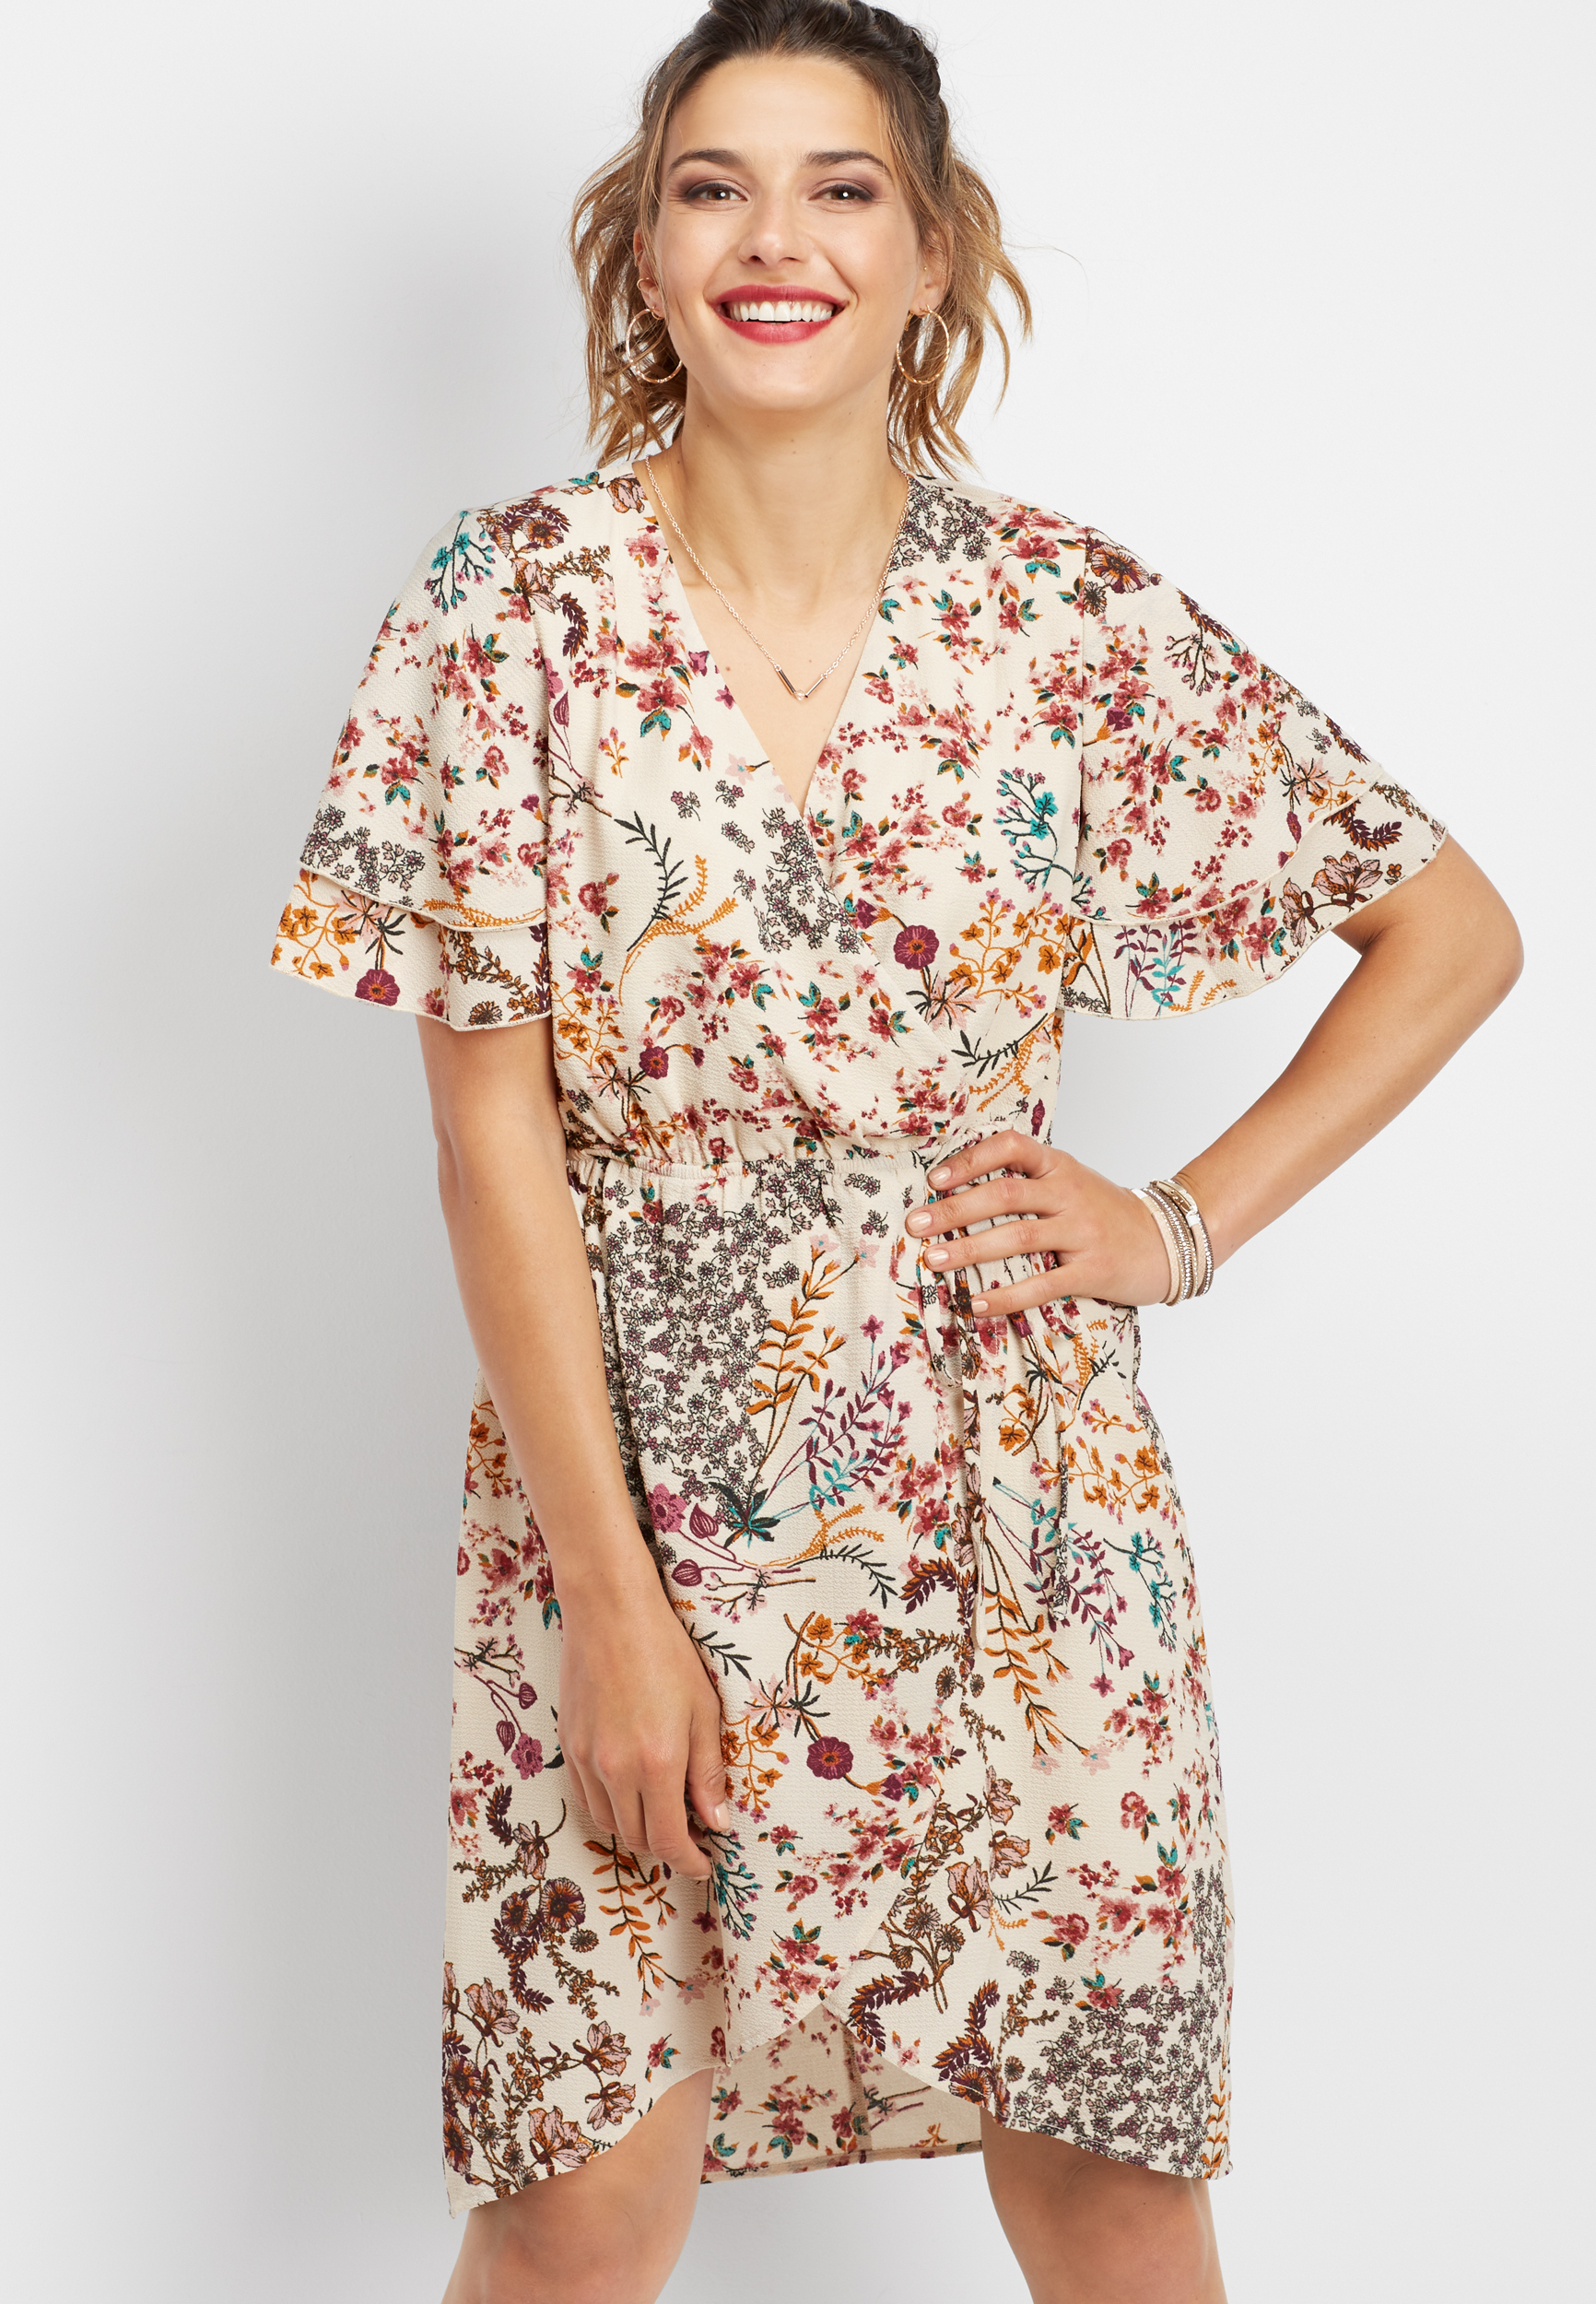 Dresses | maurices